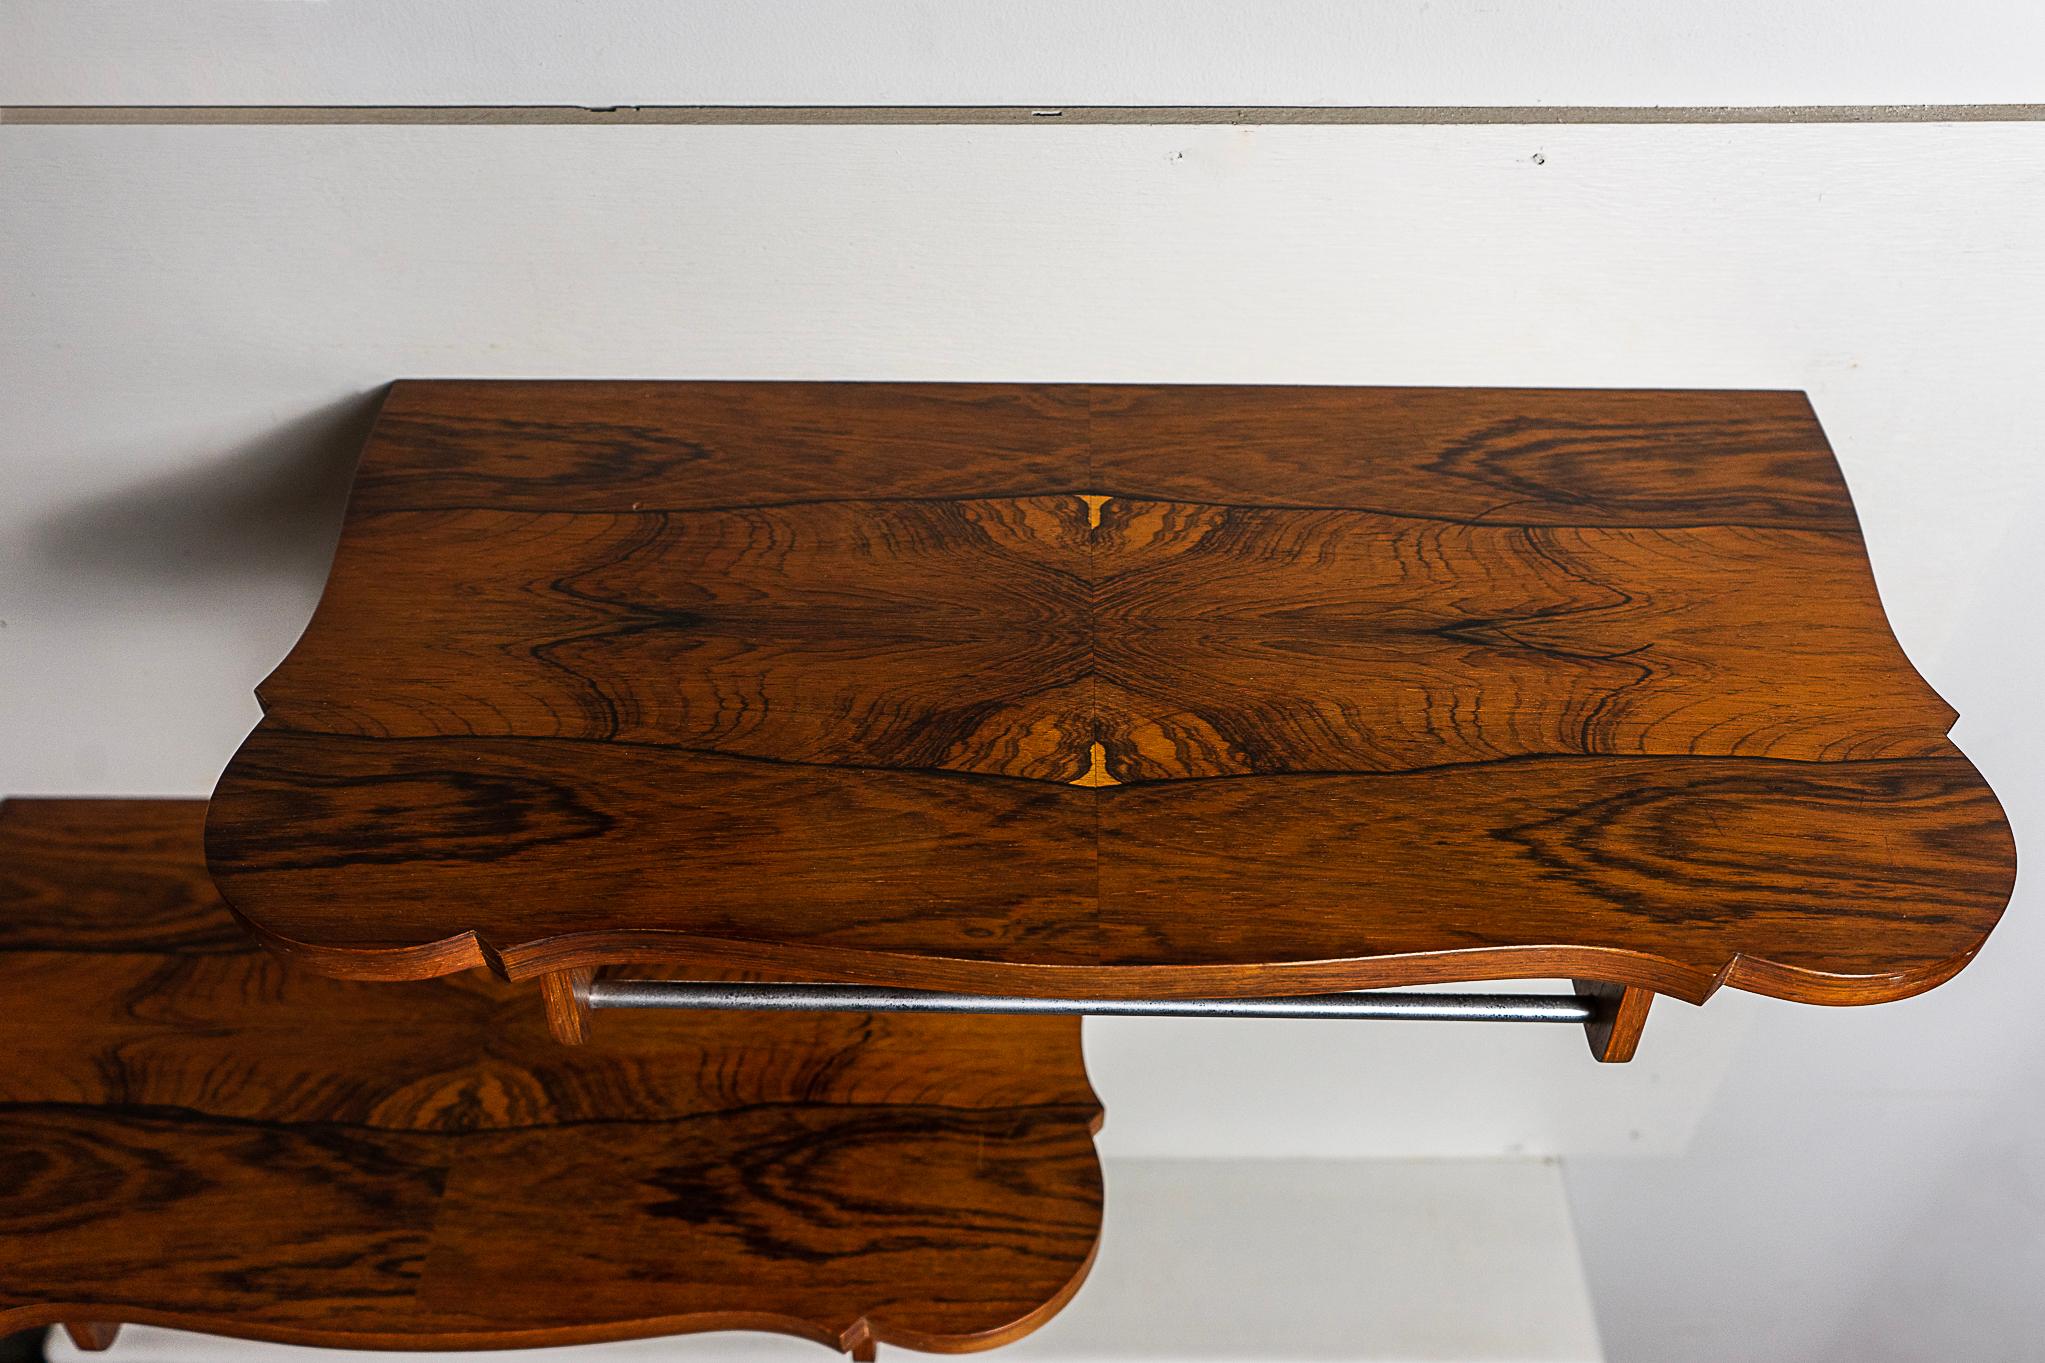 Pair of Danish Mid-Century Modern Rosewood Wall Mounted Bedsides / Night Stands For Sale 2